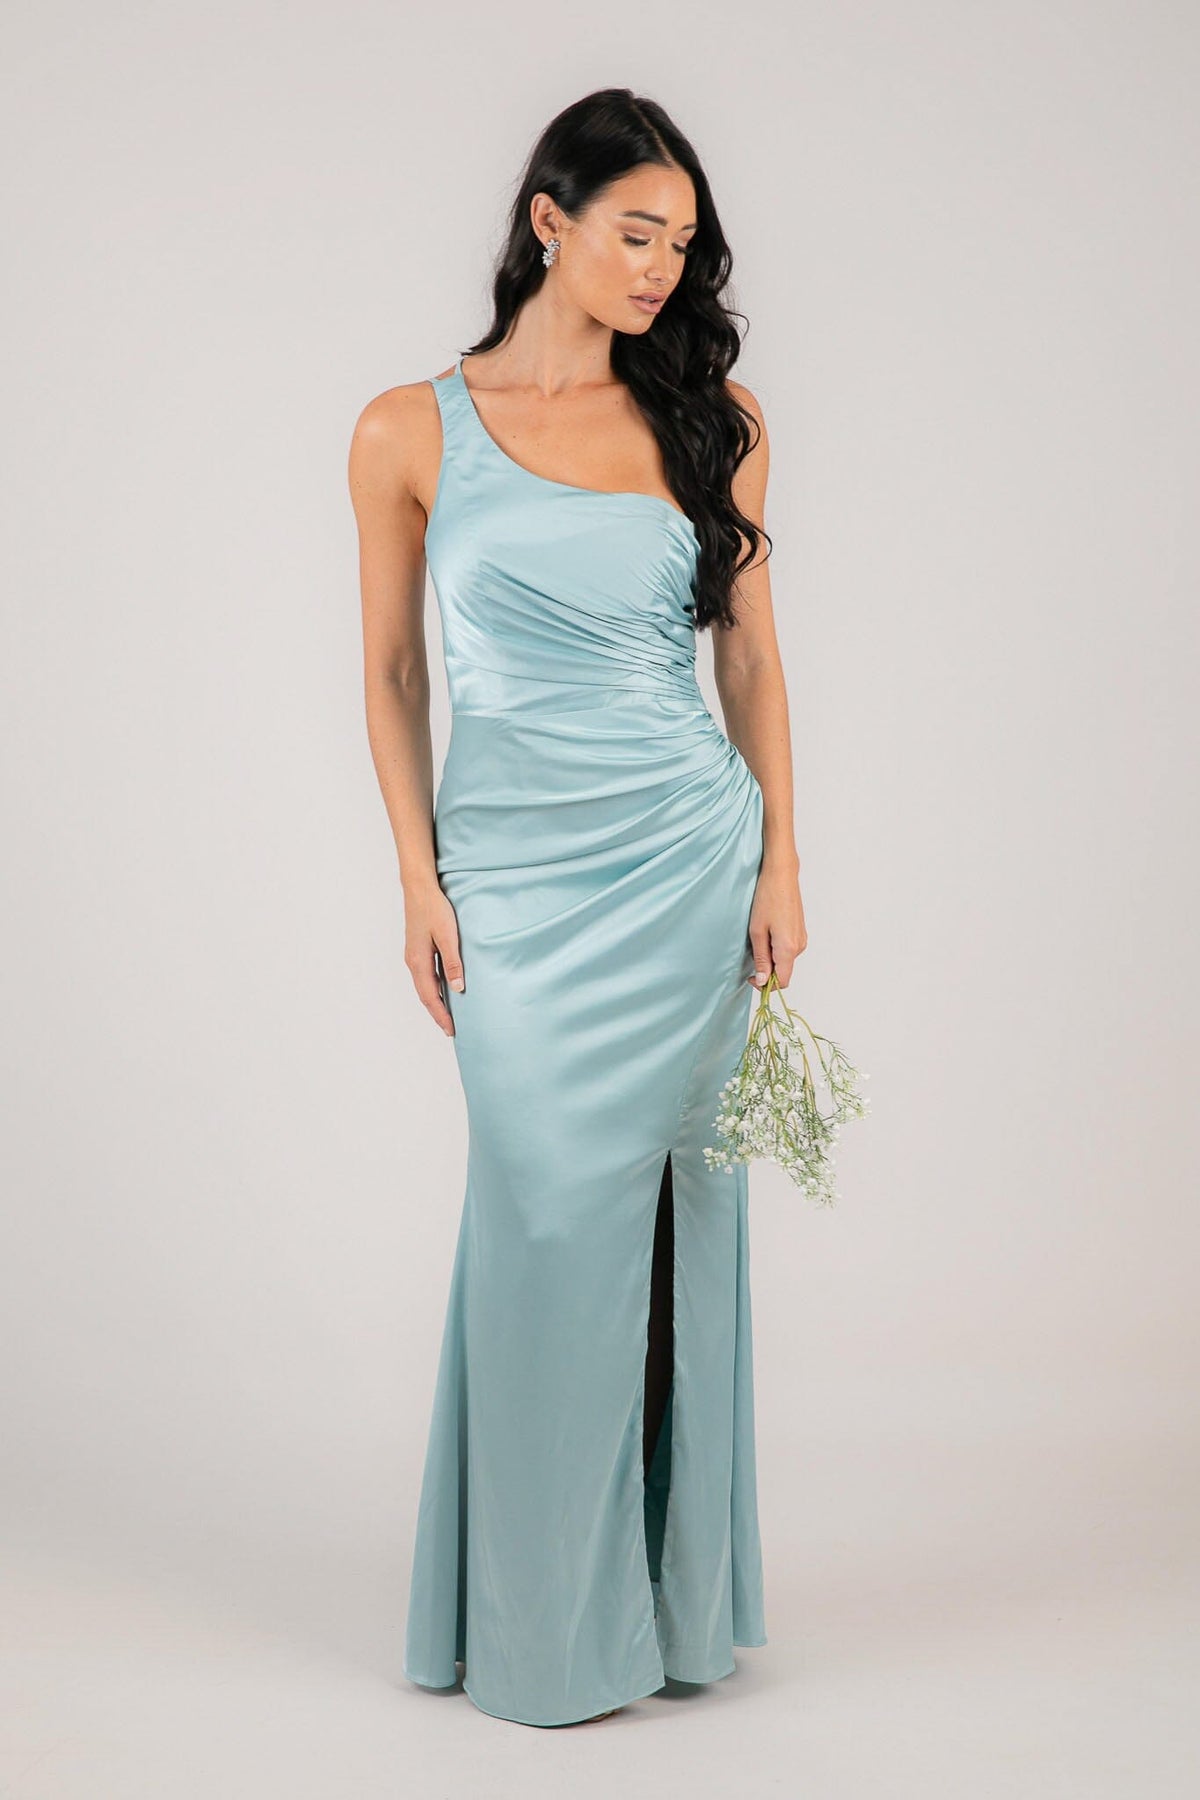 Light Blue One Shoulder Satin Maxi Bridesmaid Dress with Ruched Waist and Leg Slit